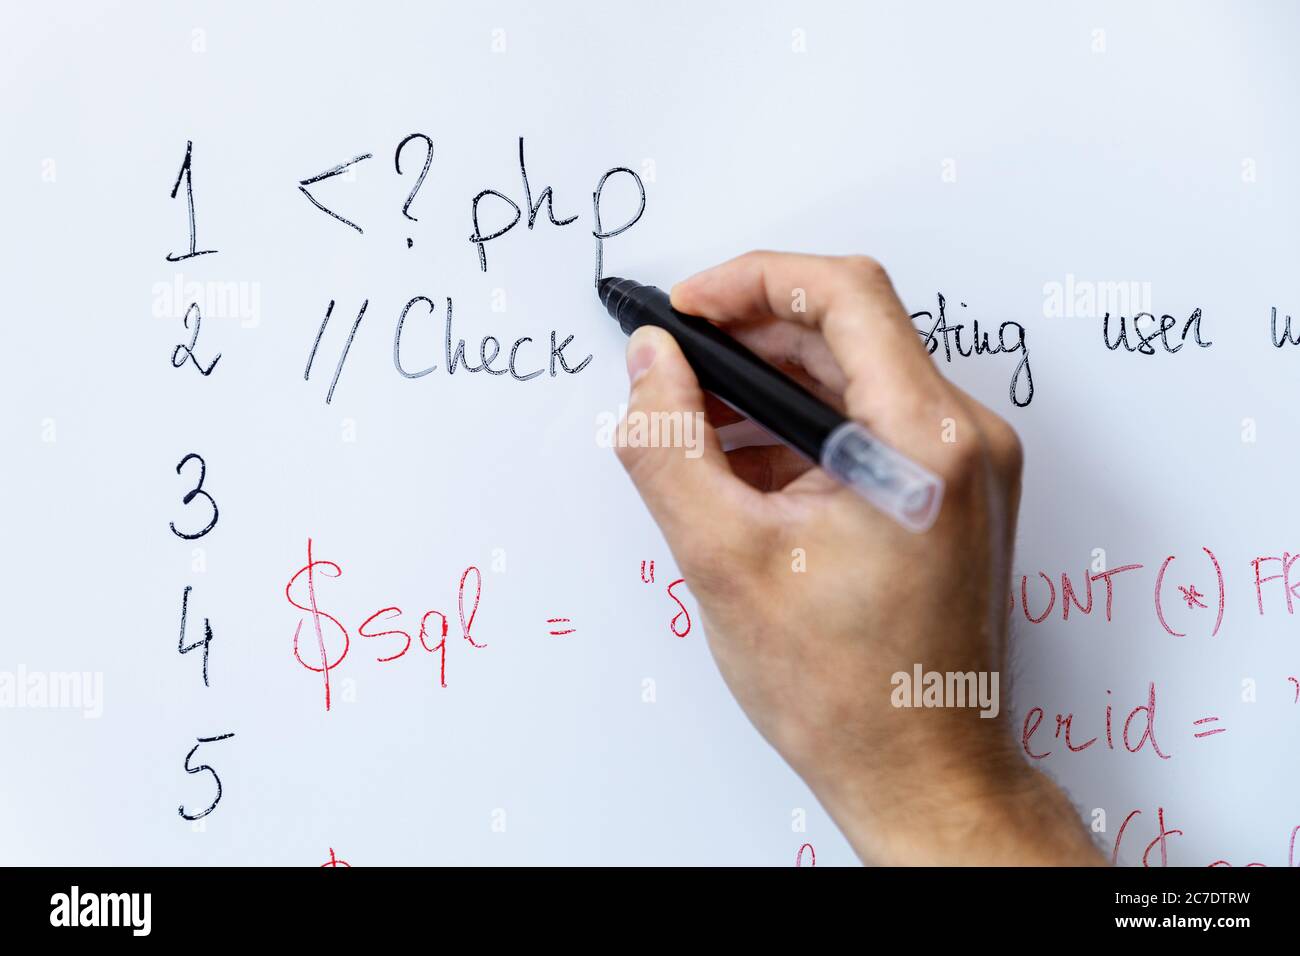 programmer education and web development - hand with marker writing php programming code on whiteboard Stock Photo